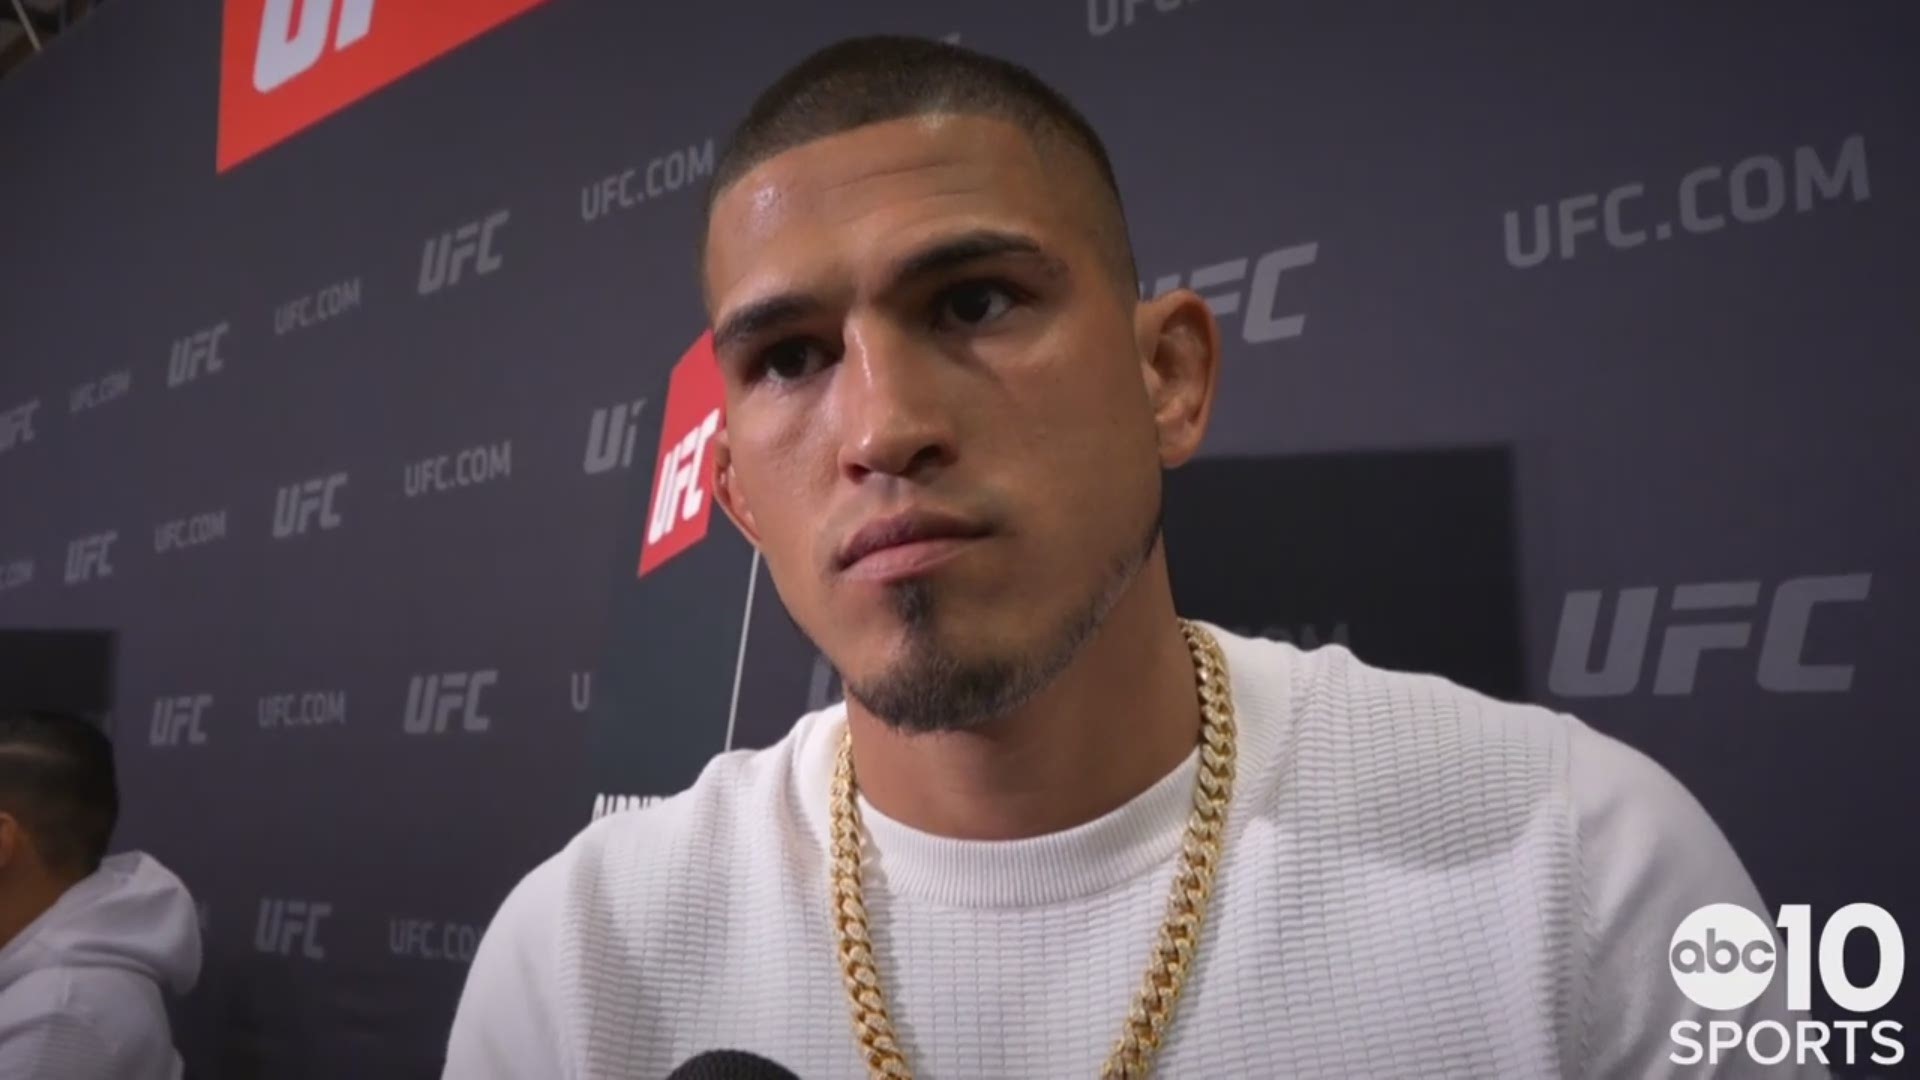 Former UFC champion Anthony "Showtime" Pettis speaks with ABC10's Sean Cunningham about his upcoming fight on Saturday against Stockton's Nate Diaz at UFC 241 and why he's so confident heading into that co-main event bout.